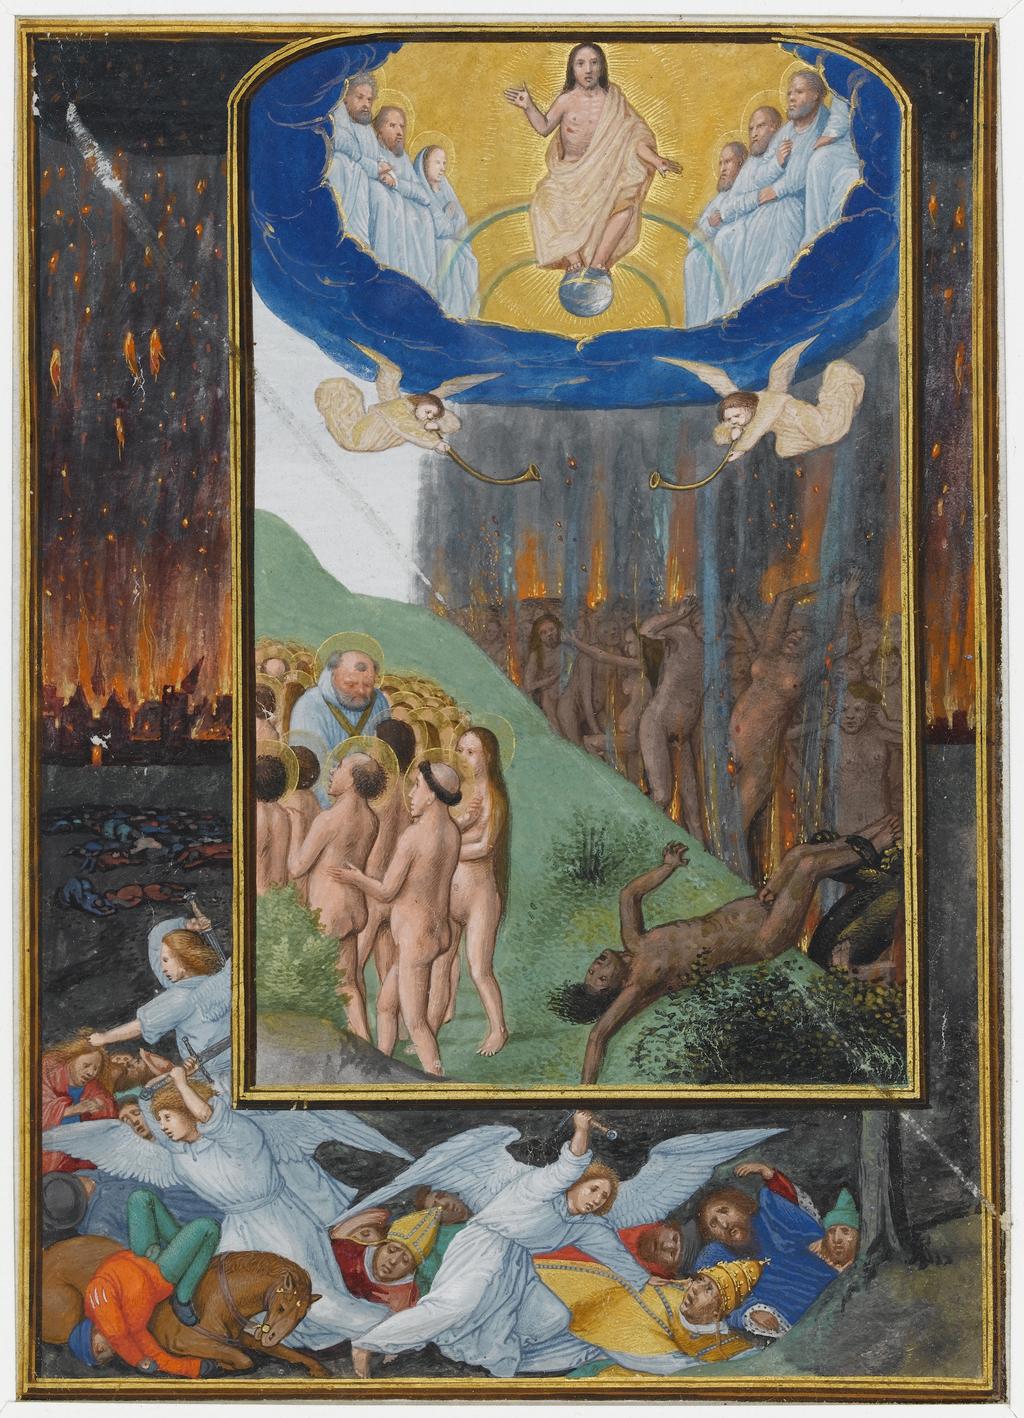 An image of Illuminated Manuscript. Miniature from the Hours of Albrecht of Brandenburg. Penitential Psalms, Last Judgement, border scene based in part on Dürer’s woodcut Massacre by the Four Angels (Apc ix). Simon Bening (Flemish, 1483-1561). Parchment, gold, six leaves with closely trimmed margins, framed illuminated area 175 x 125 mm, no text or ruling on reverse, 1522-1523. Production Place: Bruges, Flanders.